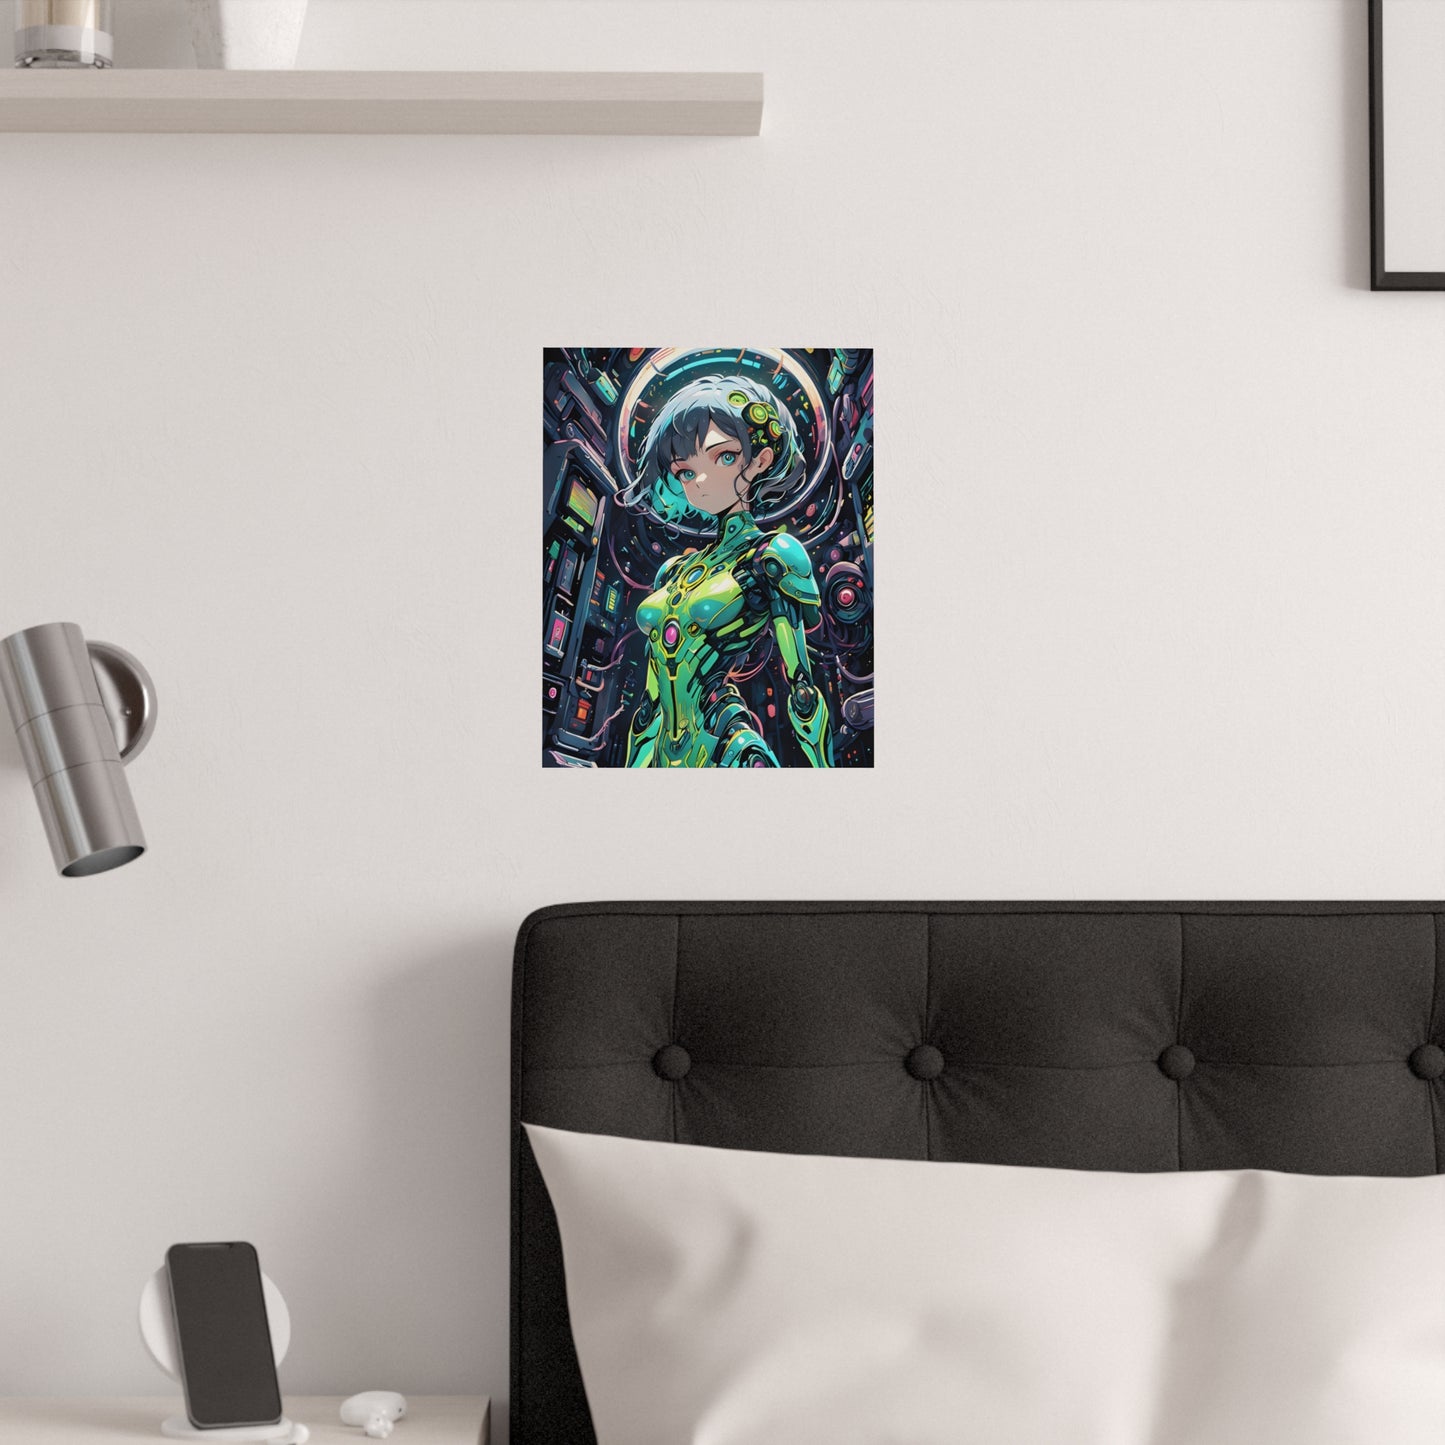 Halo - Satin Posters (210gsm)